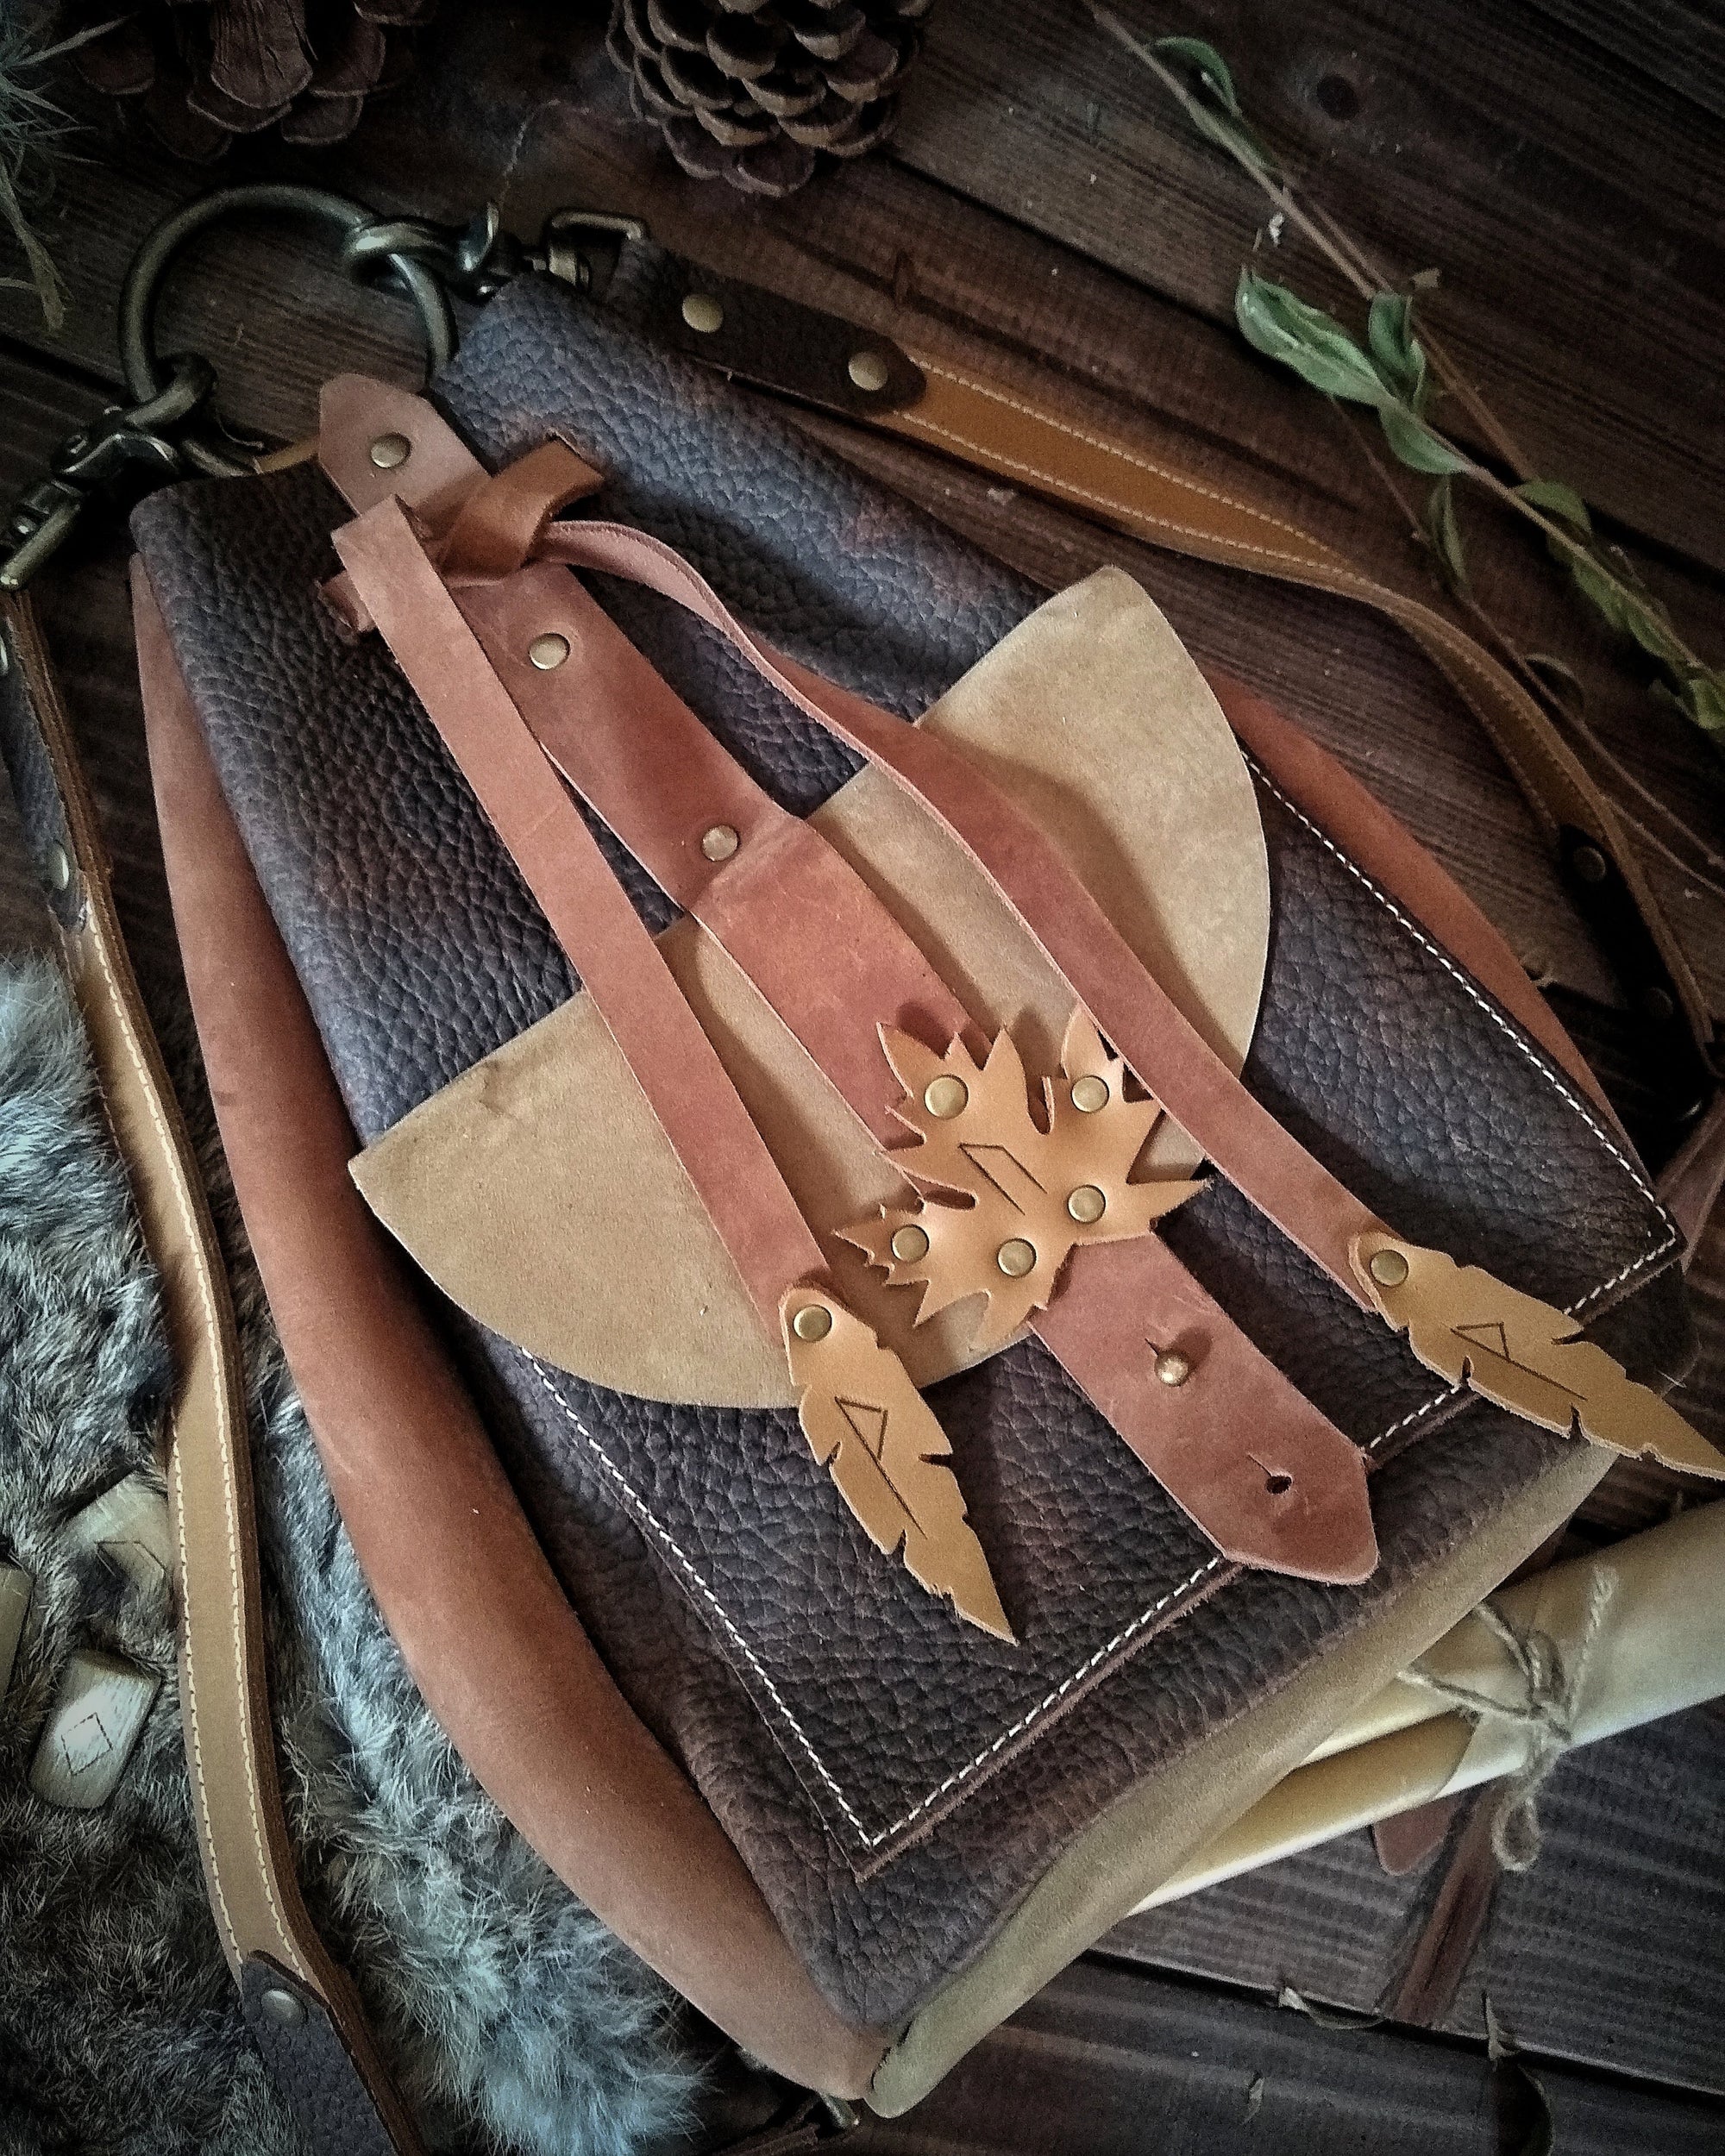 The Adventurer's Day Pack